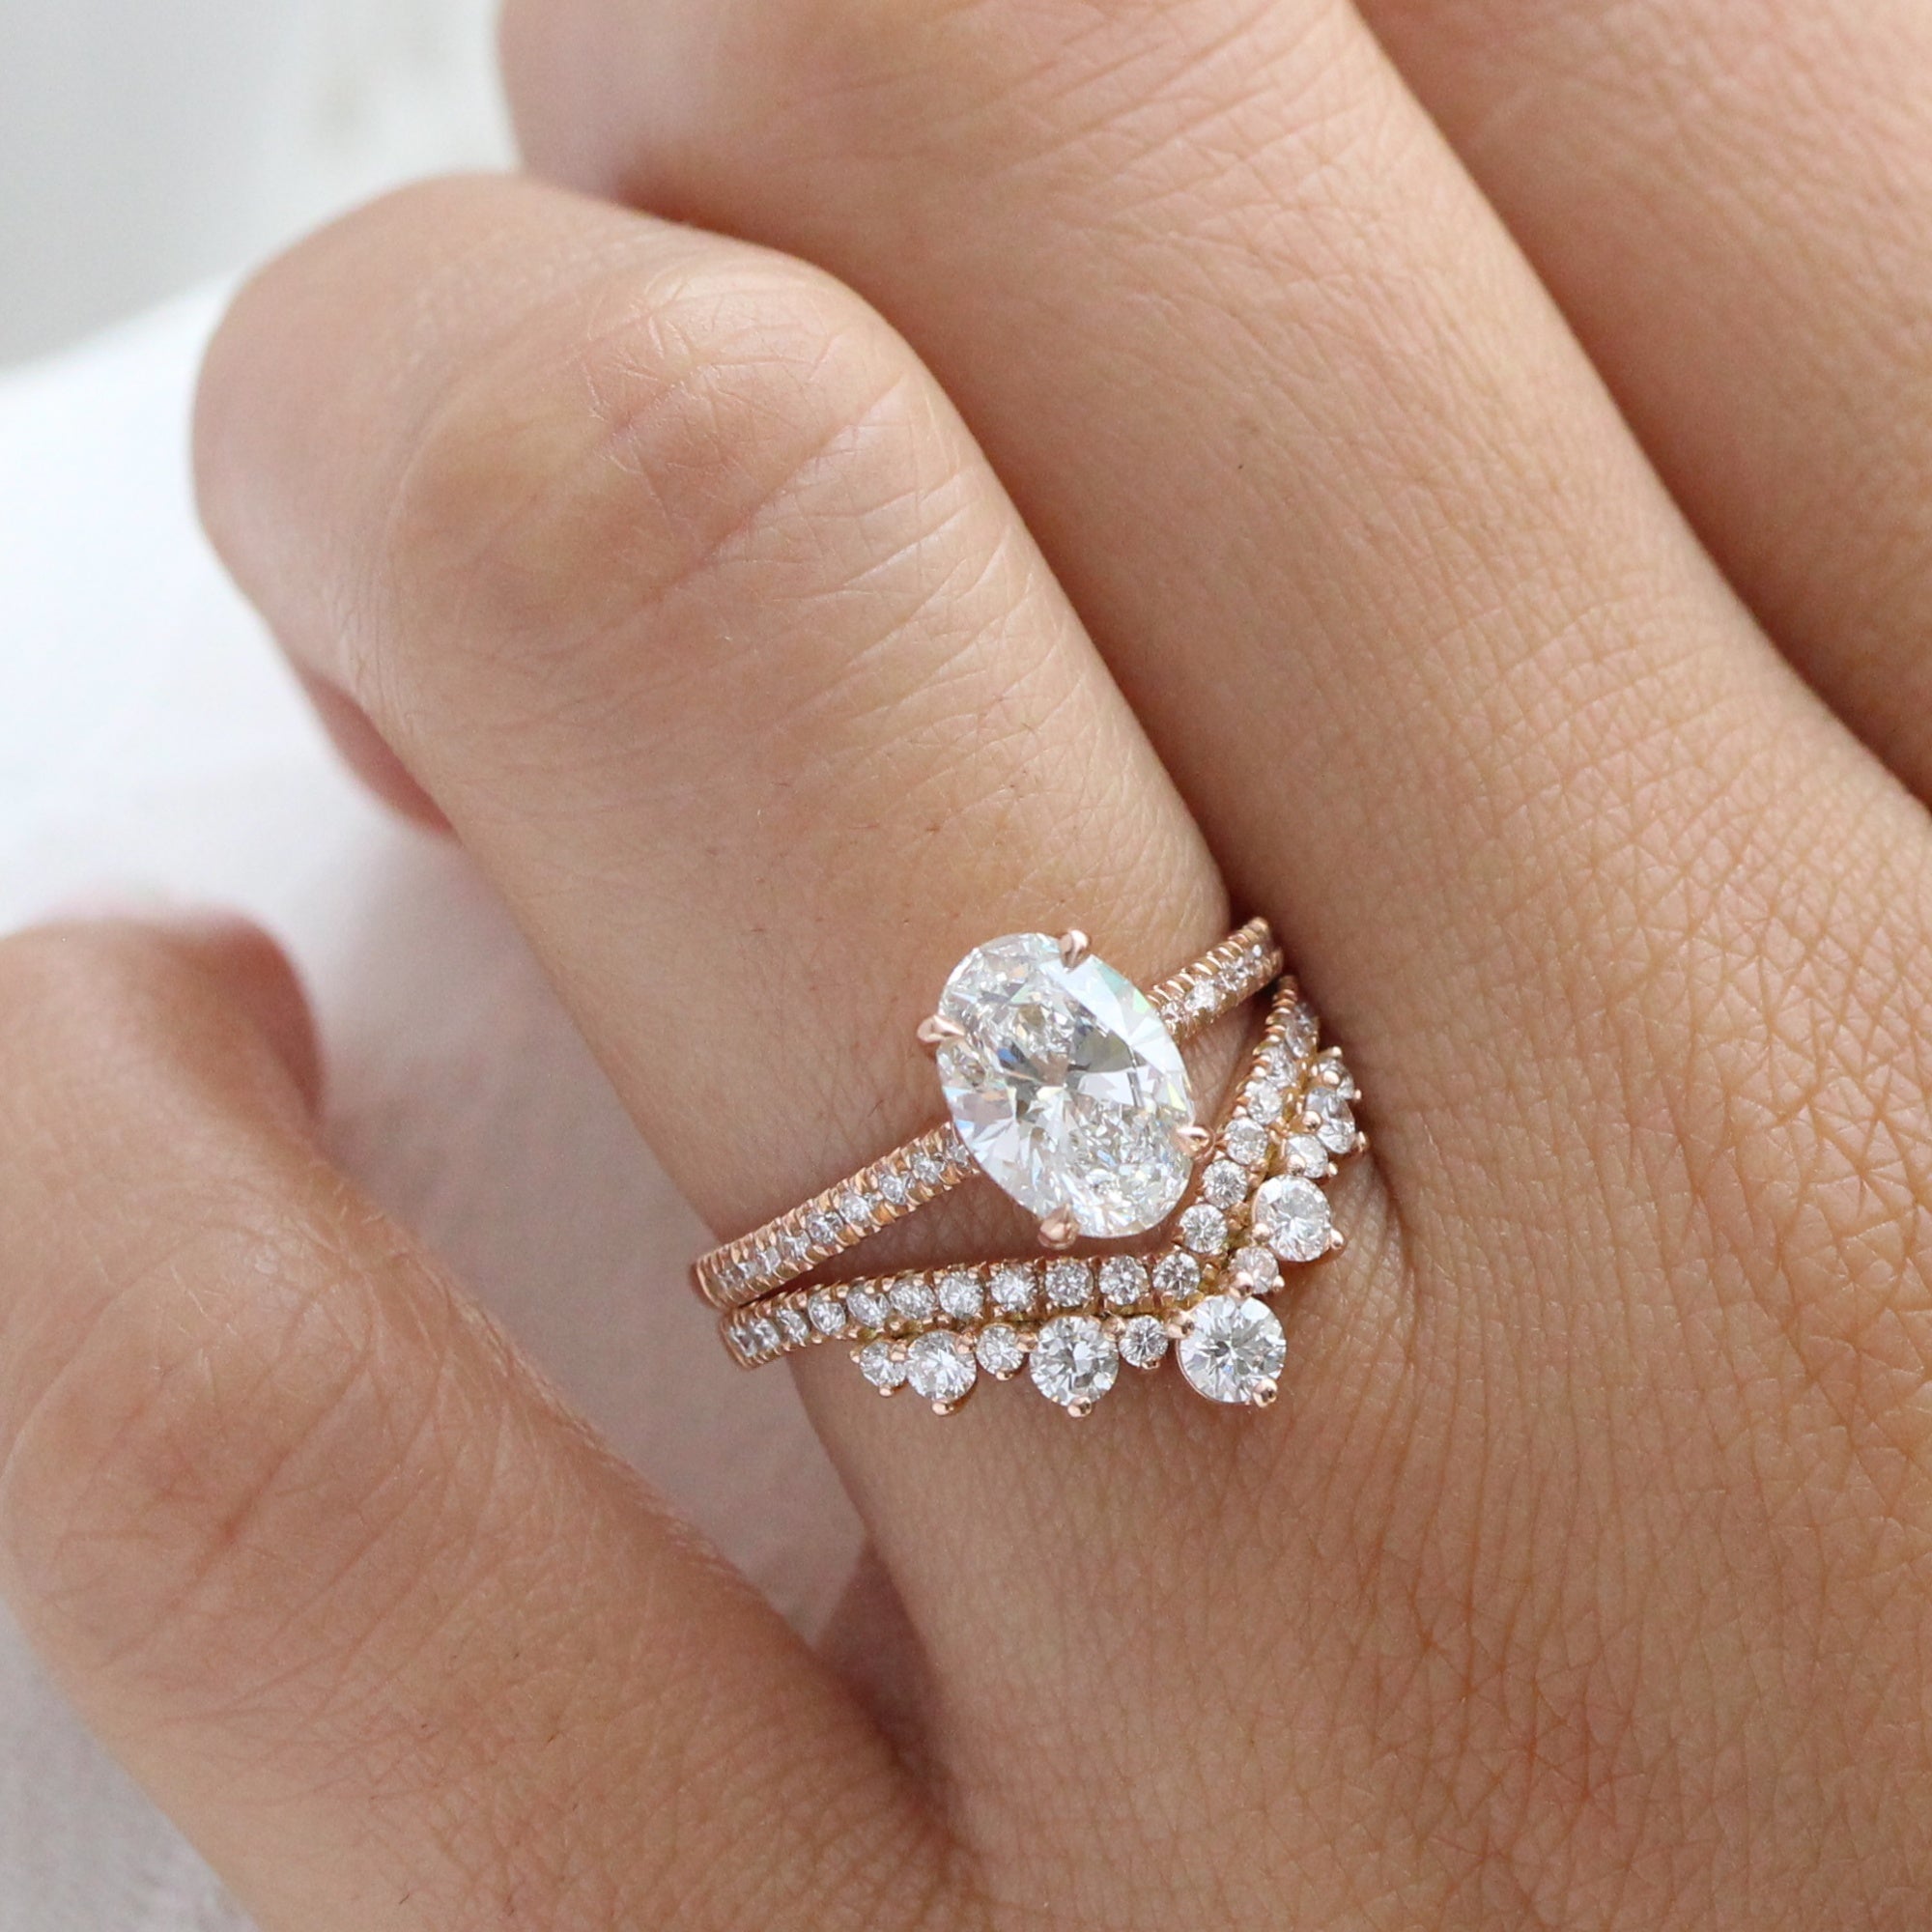 2Ct Oval Lab Diamond Ring Bridal Set Rose Gold Solitaire Ring Stack